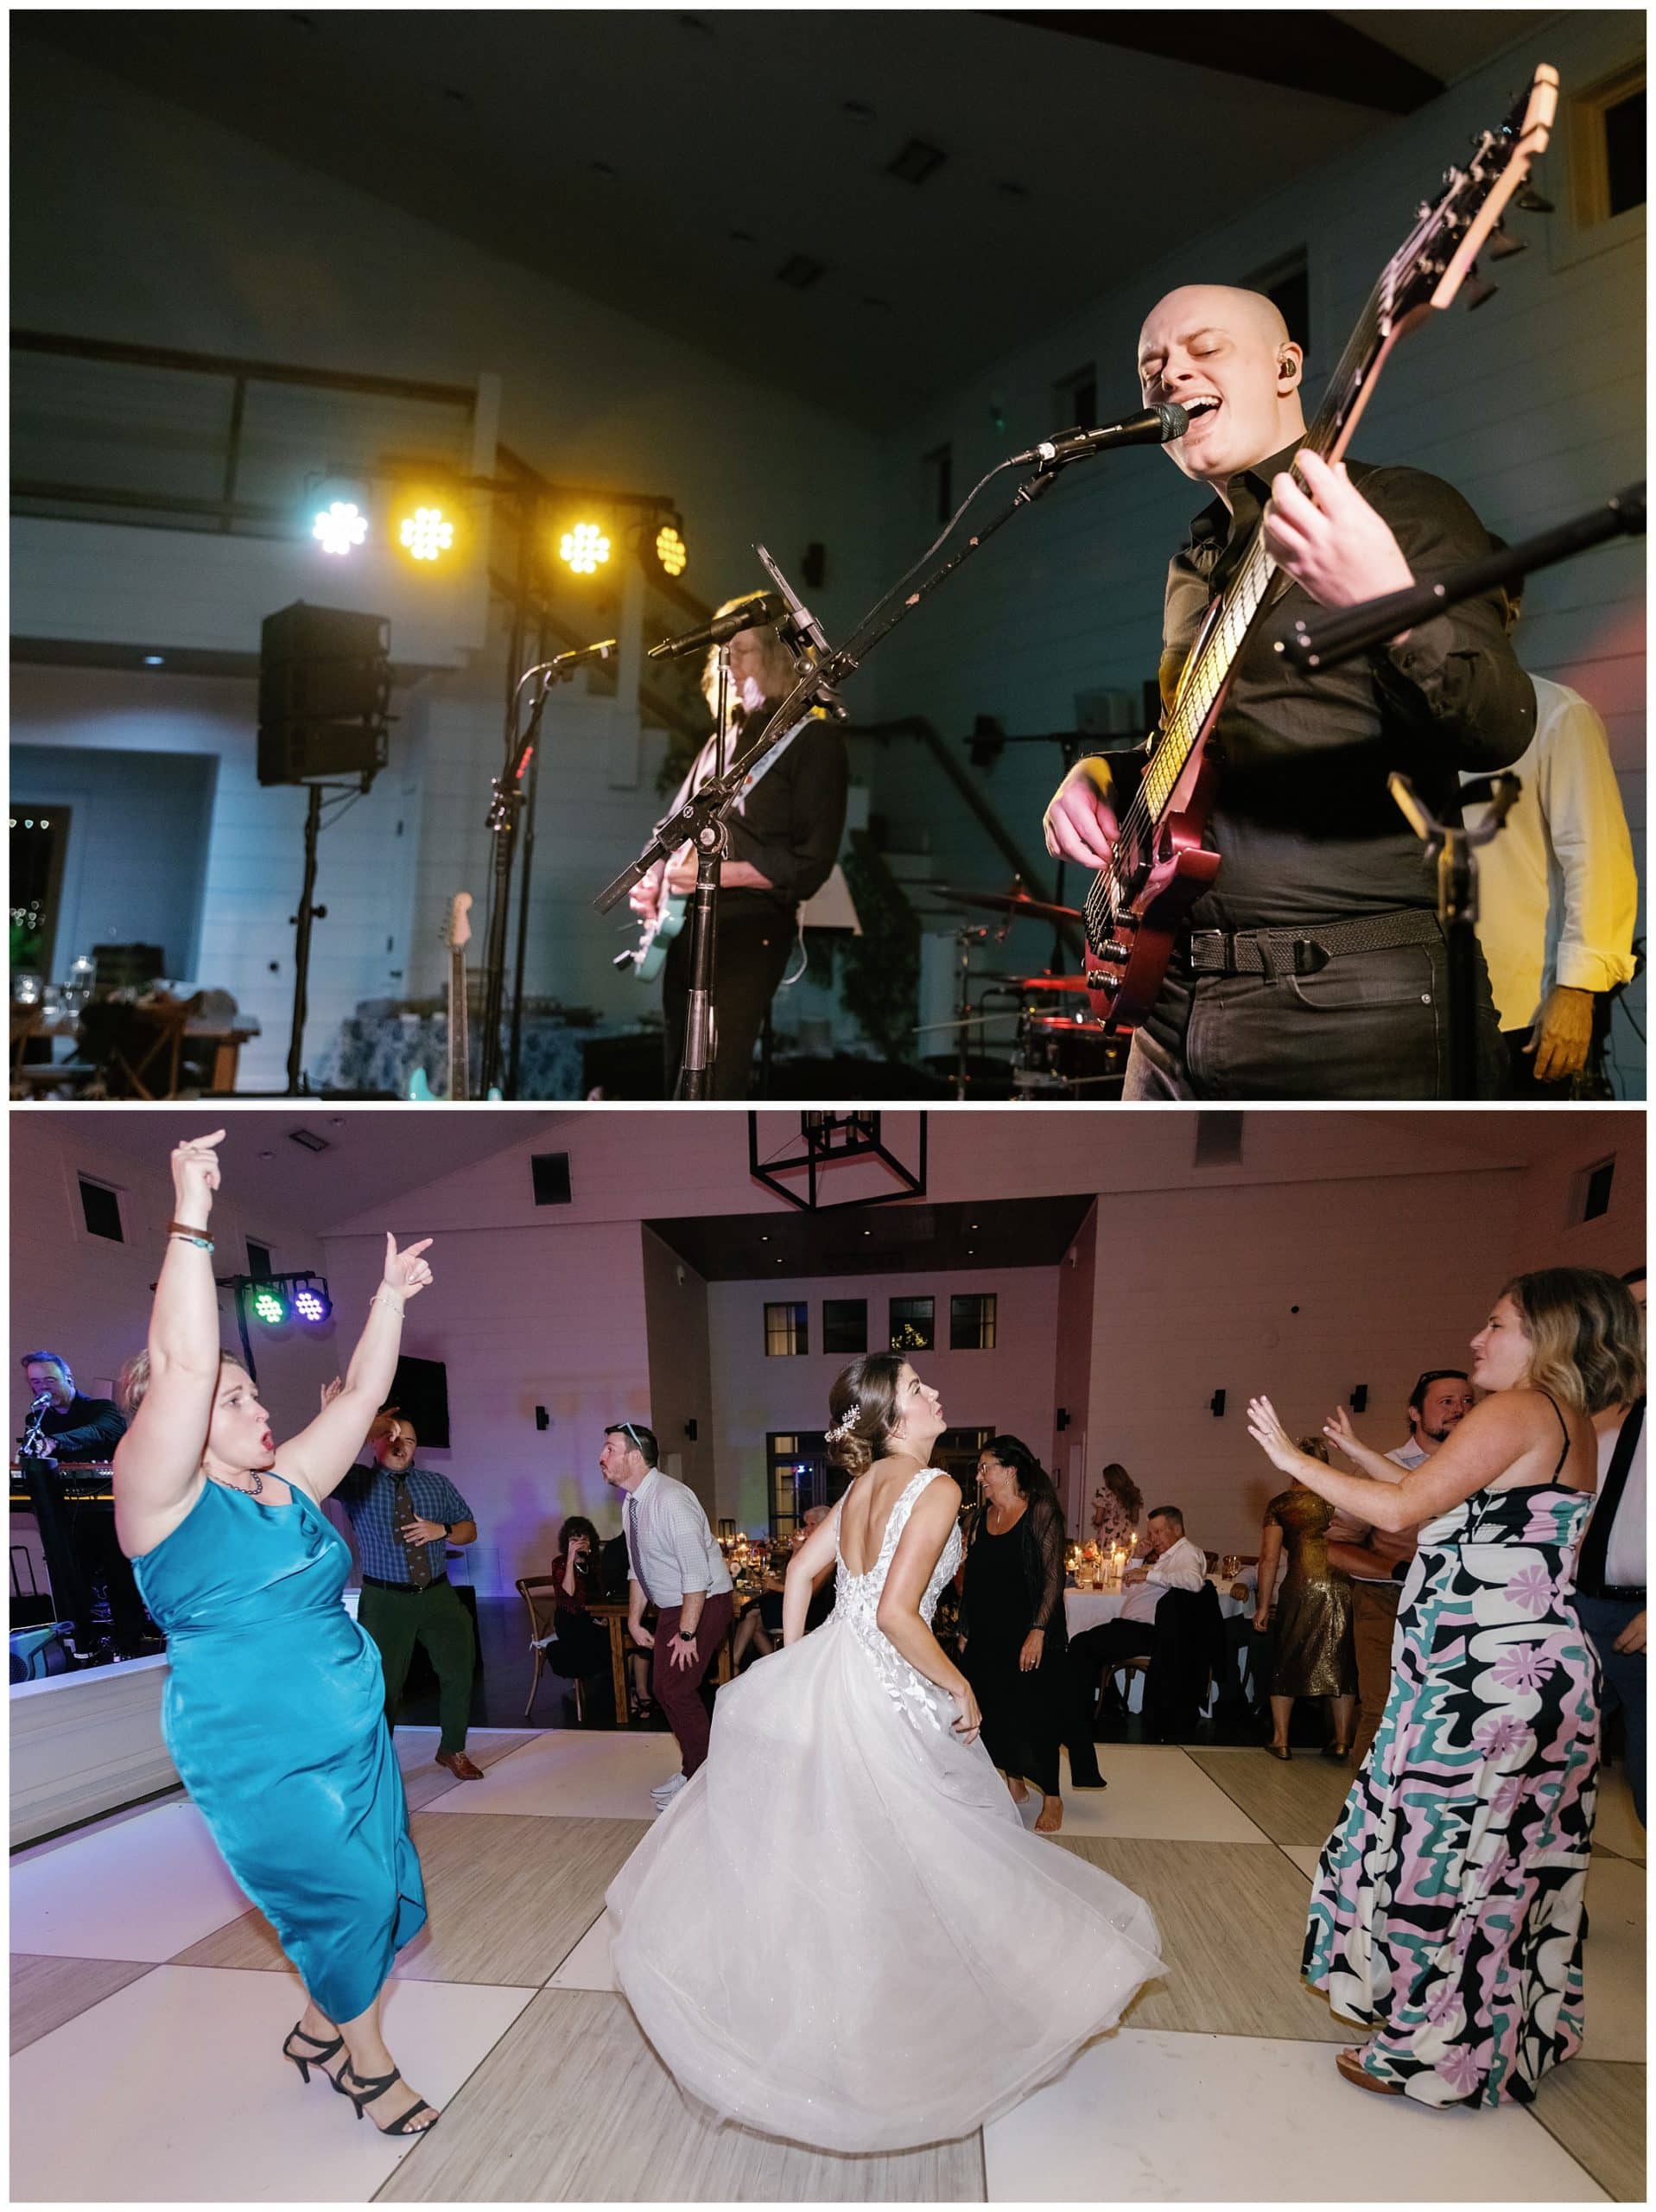 A bride and groom dancing on the dance floor at a wedding reception.